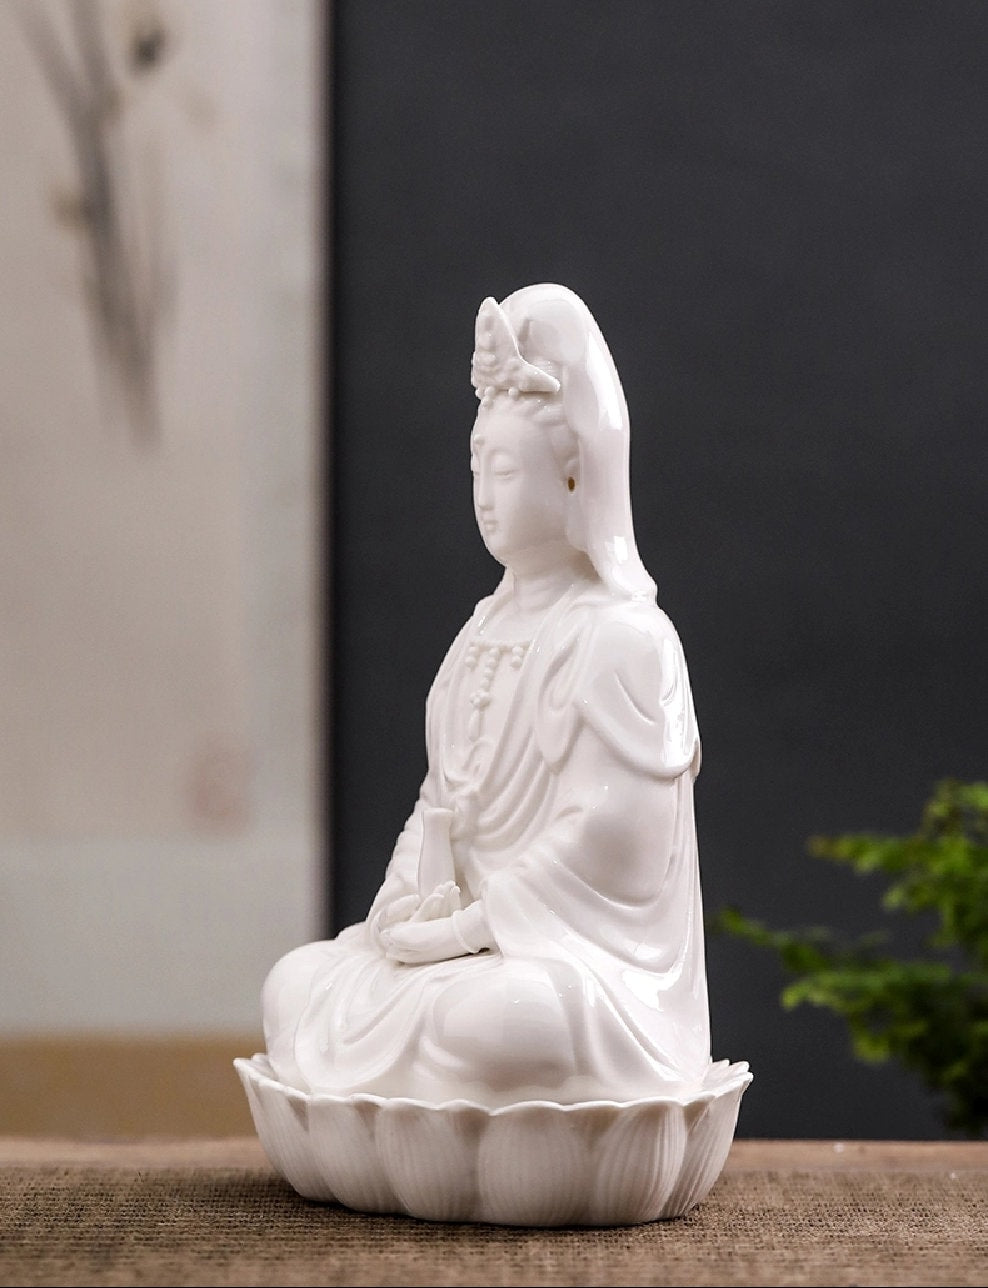 Ceramic White Guan Yin Buddha Statue Ornament | Spiritual Religion | Gifting for him or her | Goddess of Compassion | Meditation